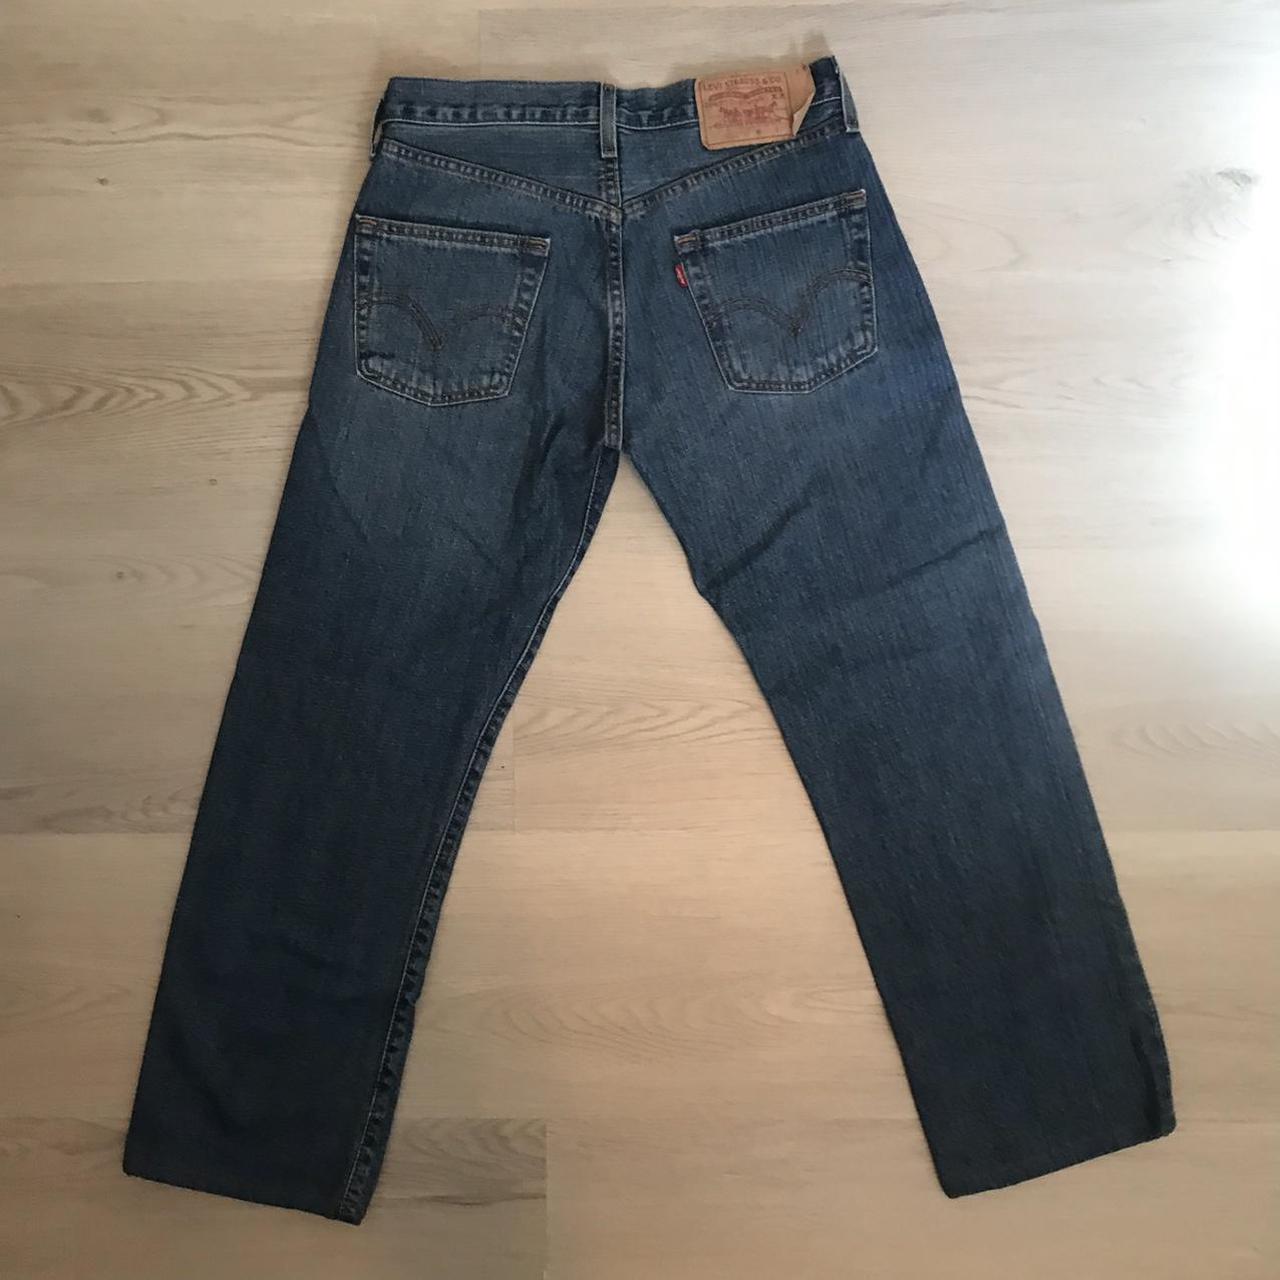 Levi's Women's Navy and Blue Jeans (4)